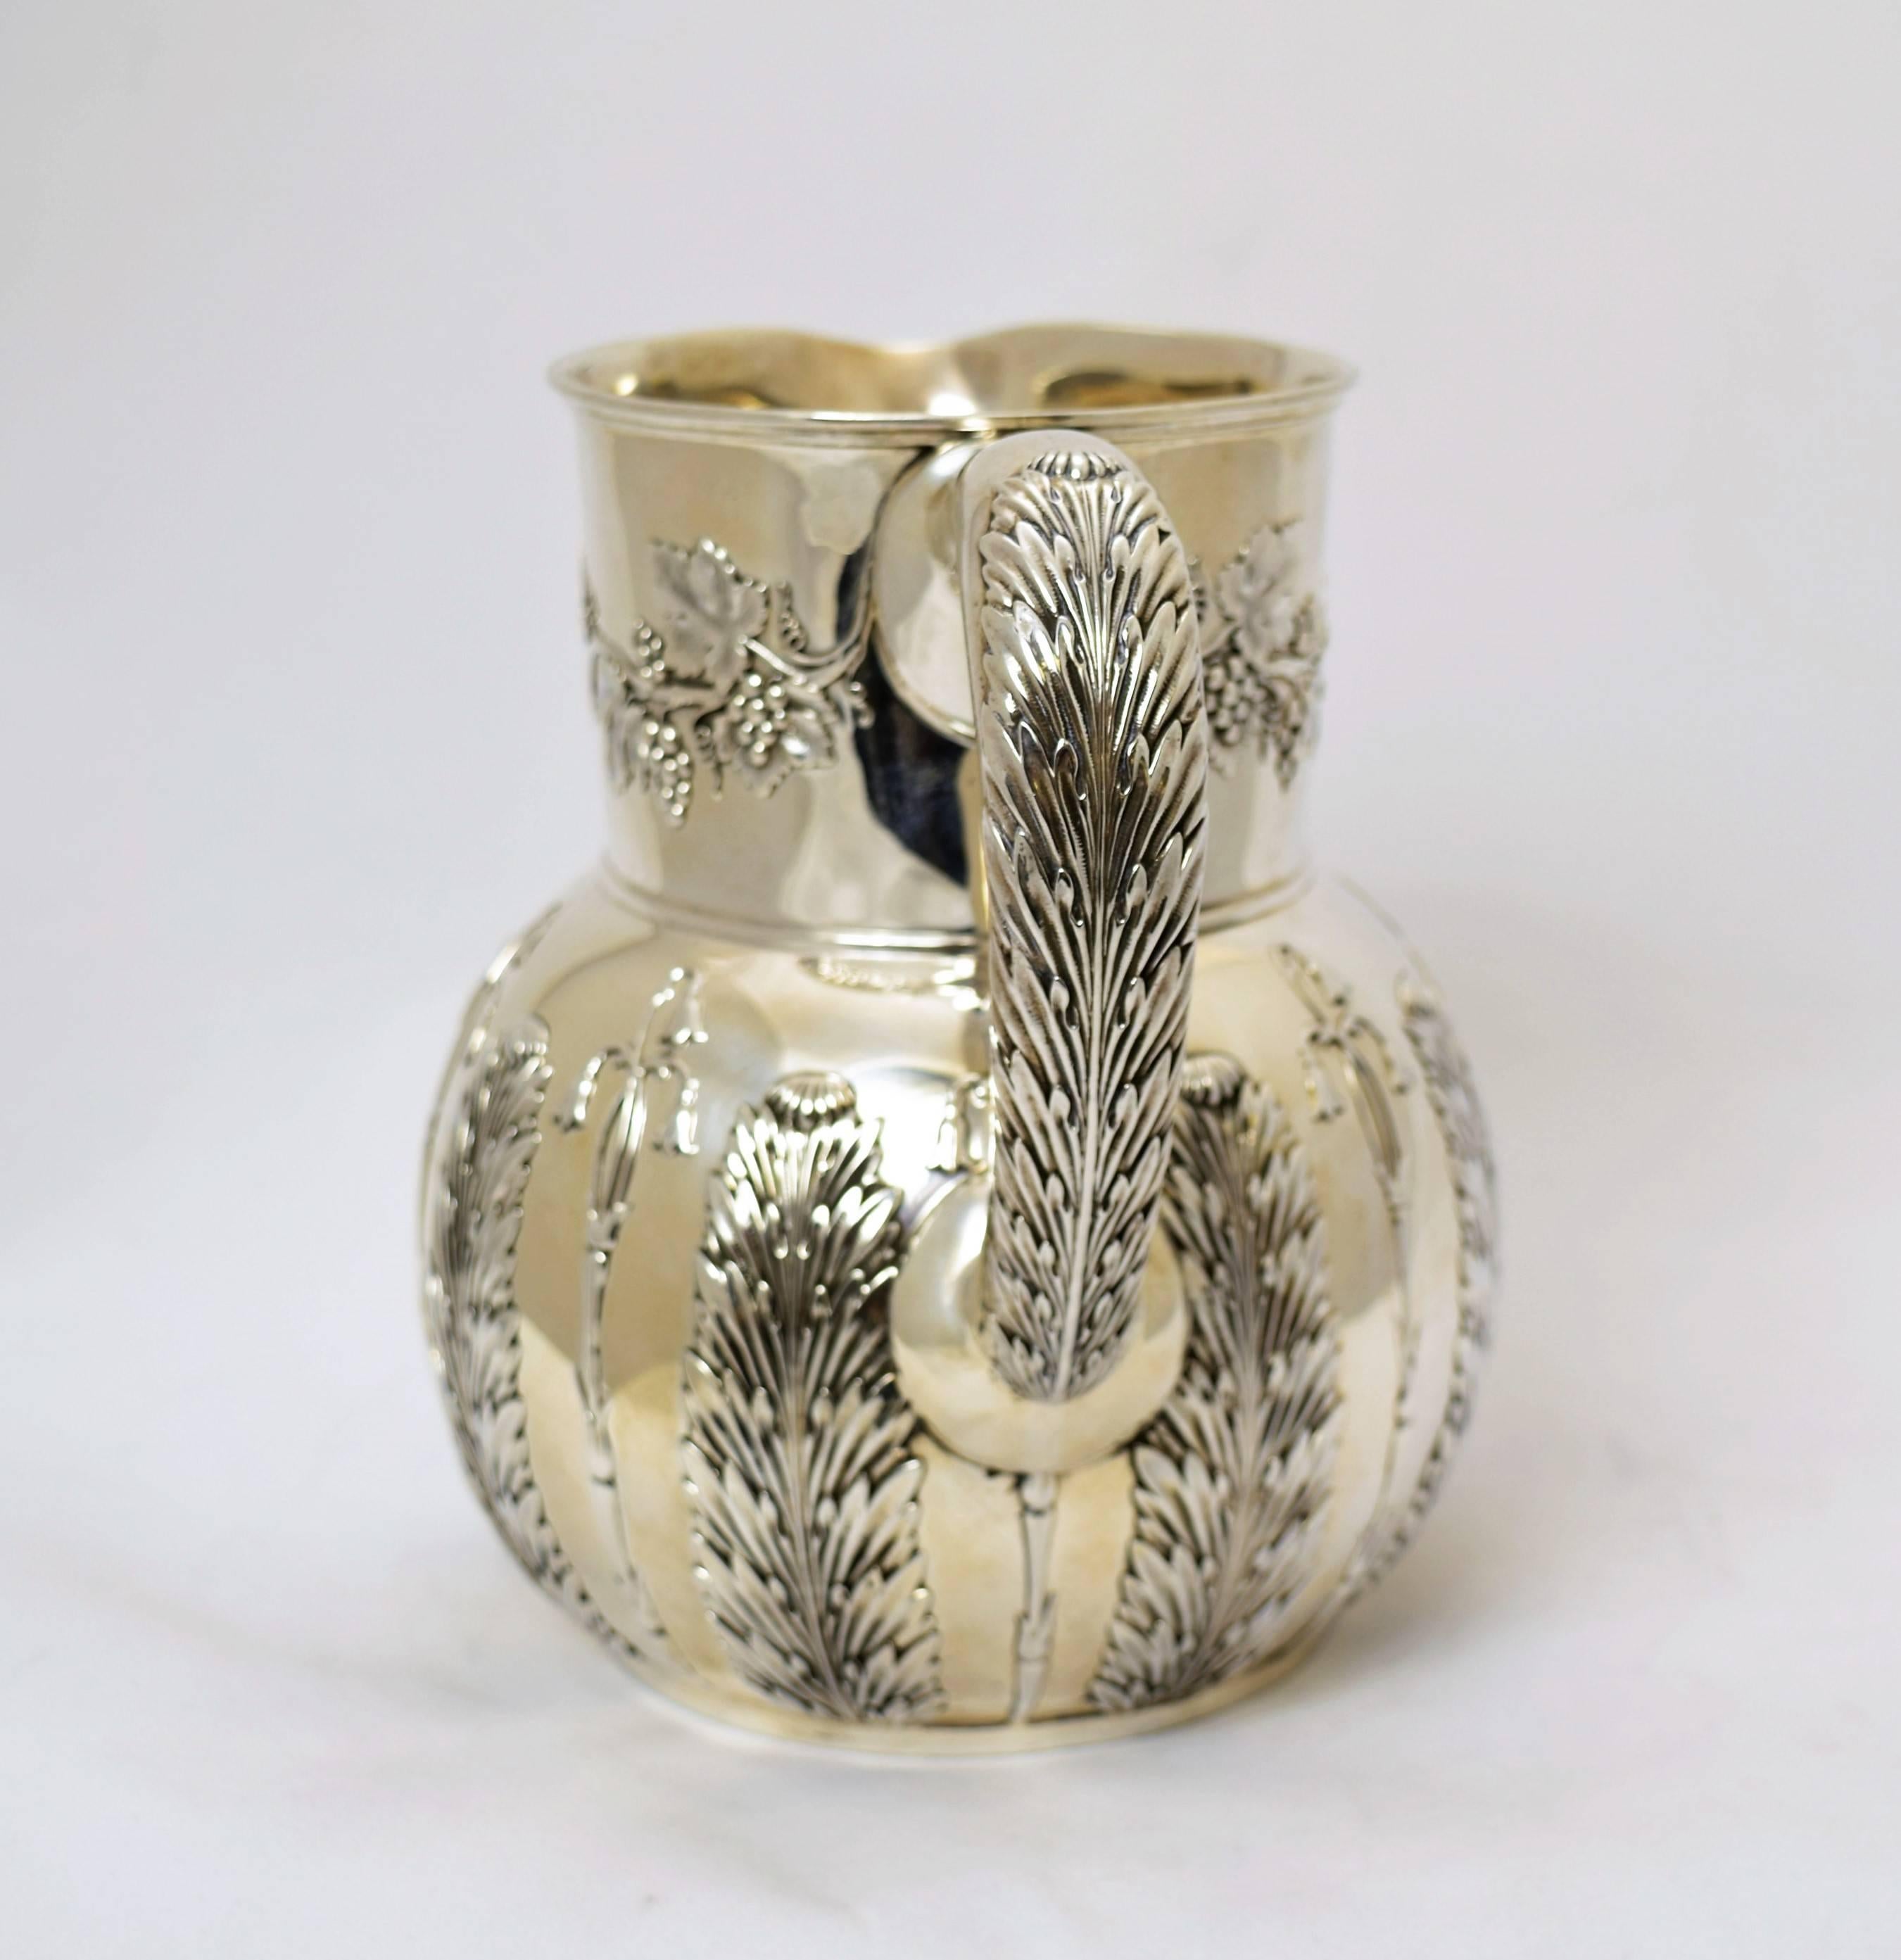 Being offered is a circa 1885 sterling silver water pitcher by Tiffany & Co. of New York, comprising a bulbous form body with applied foliate. It holds 4 1/2 pints. Dimensions: 7 inches height. Marked as illustrated. In excellent condition.